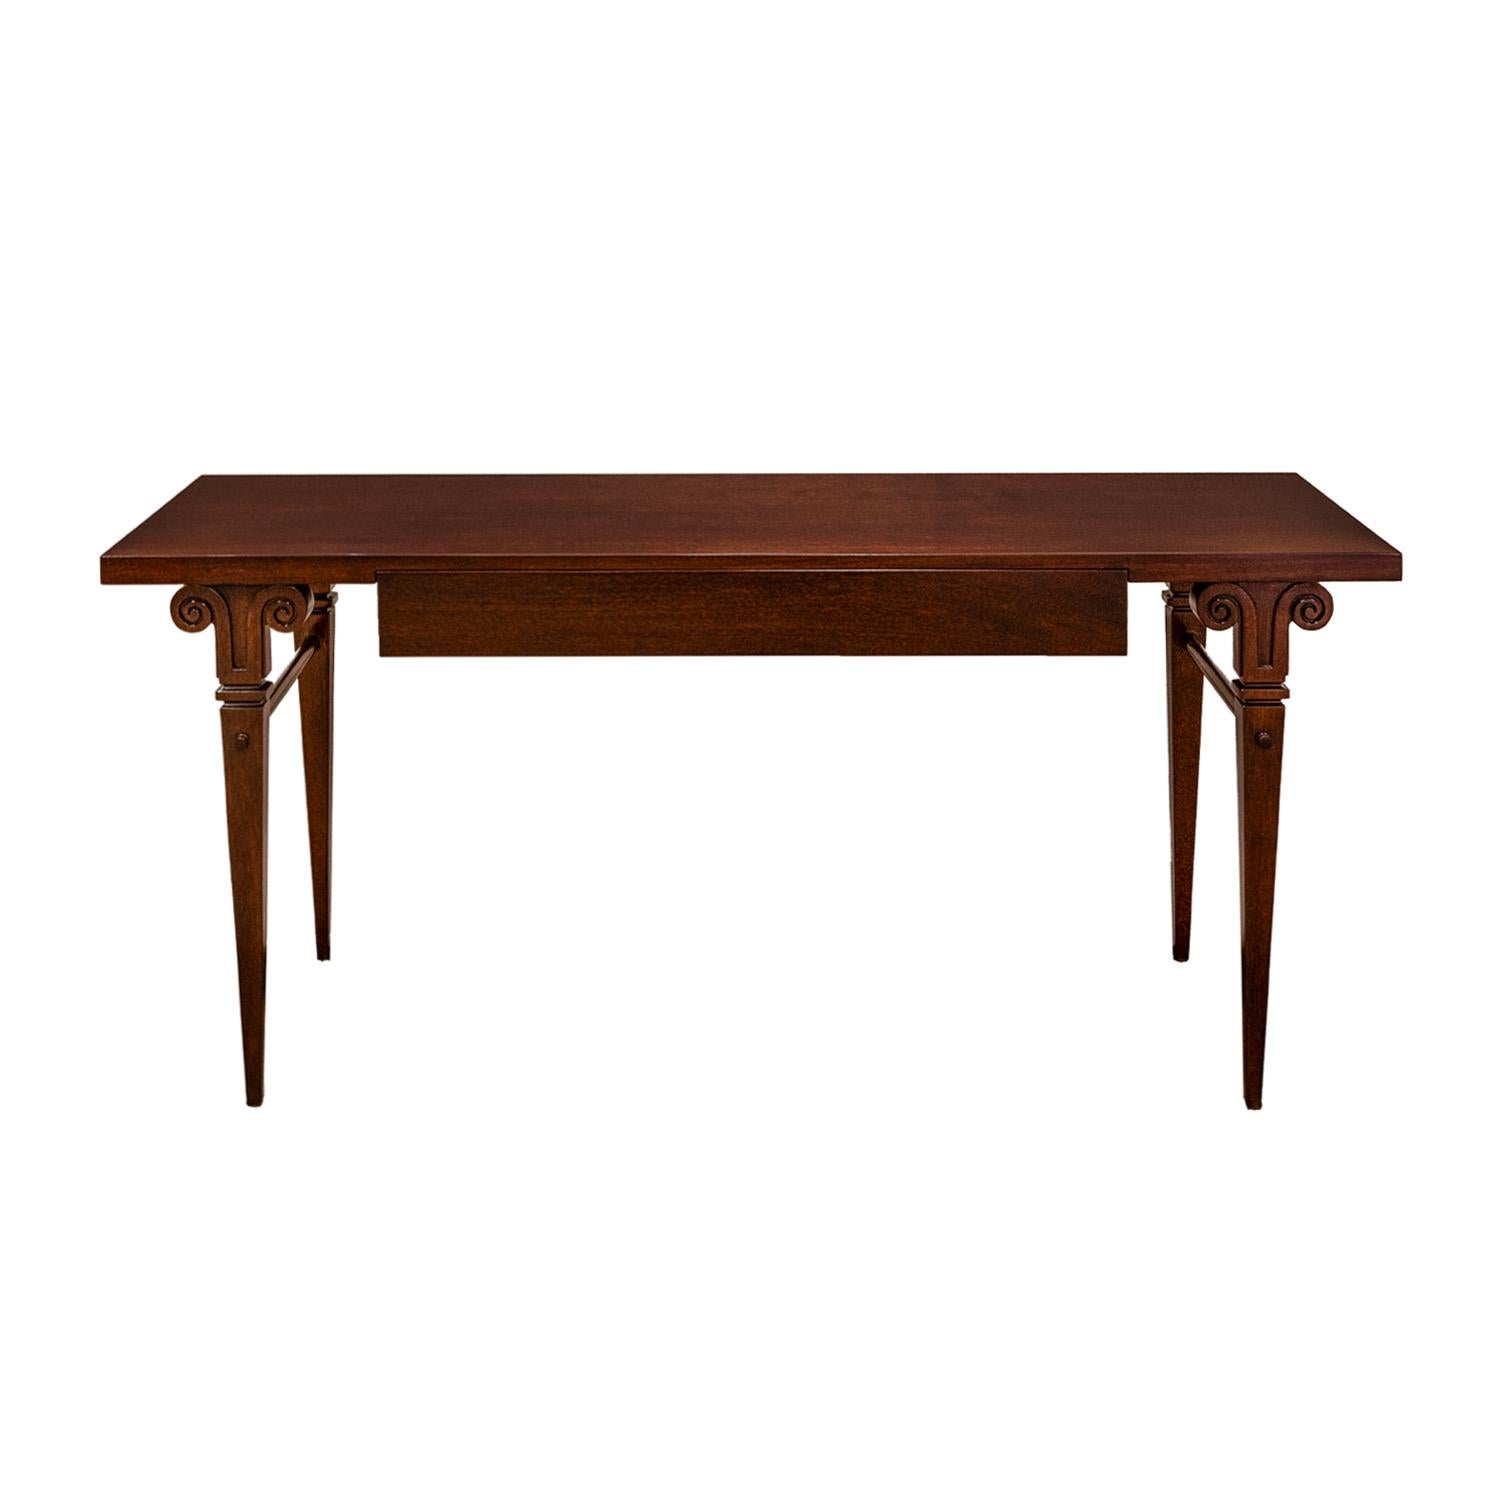 Neoclassical style console table model 534 in mahogany with drawer by Tommi Parzinger for Parzinger Originals, American 1960's.  This has been newly refinished by Lobel Modern.  The craftsmanship is superb and it’s extremely refined.  Another